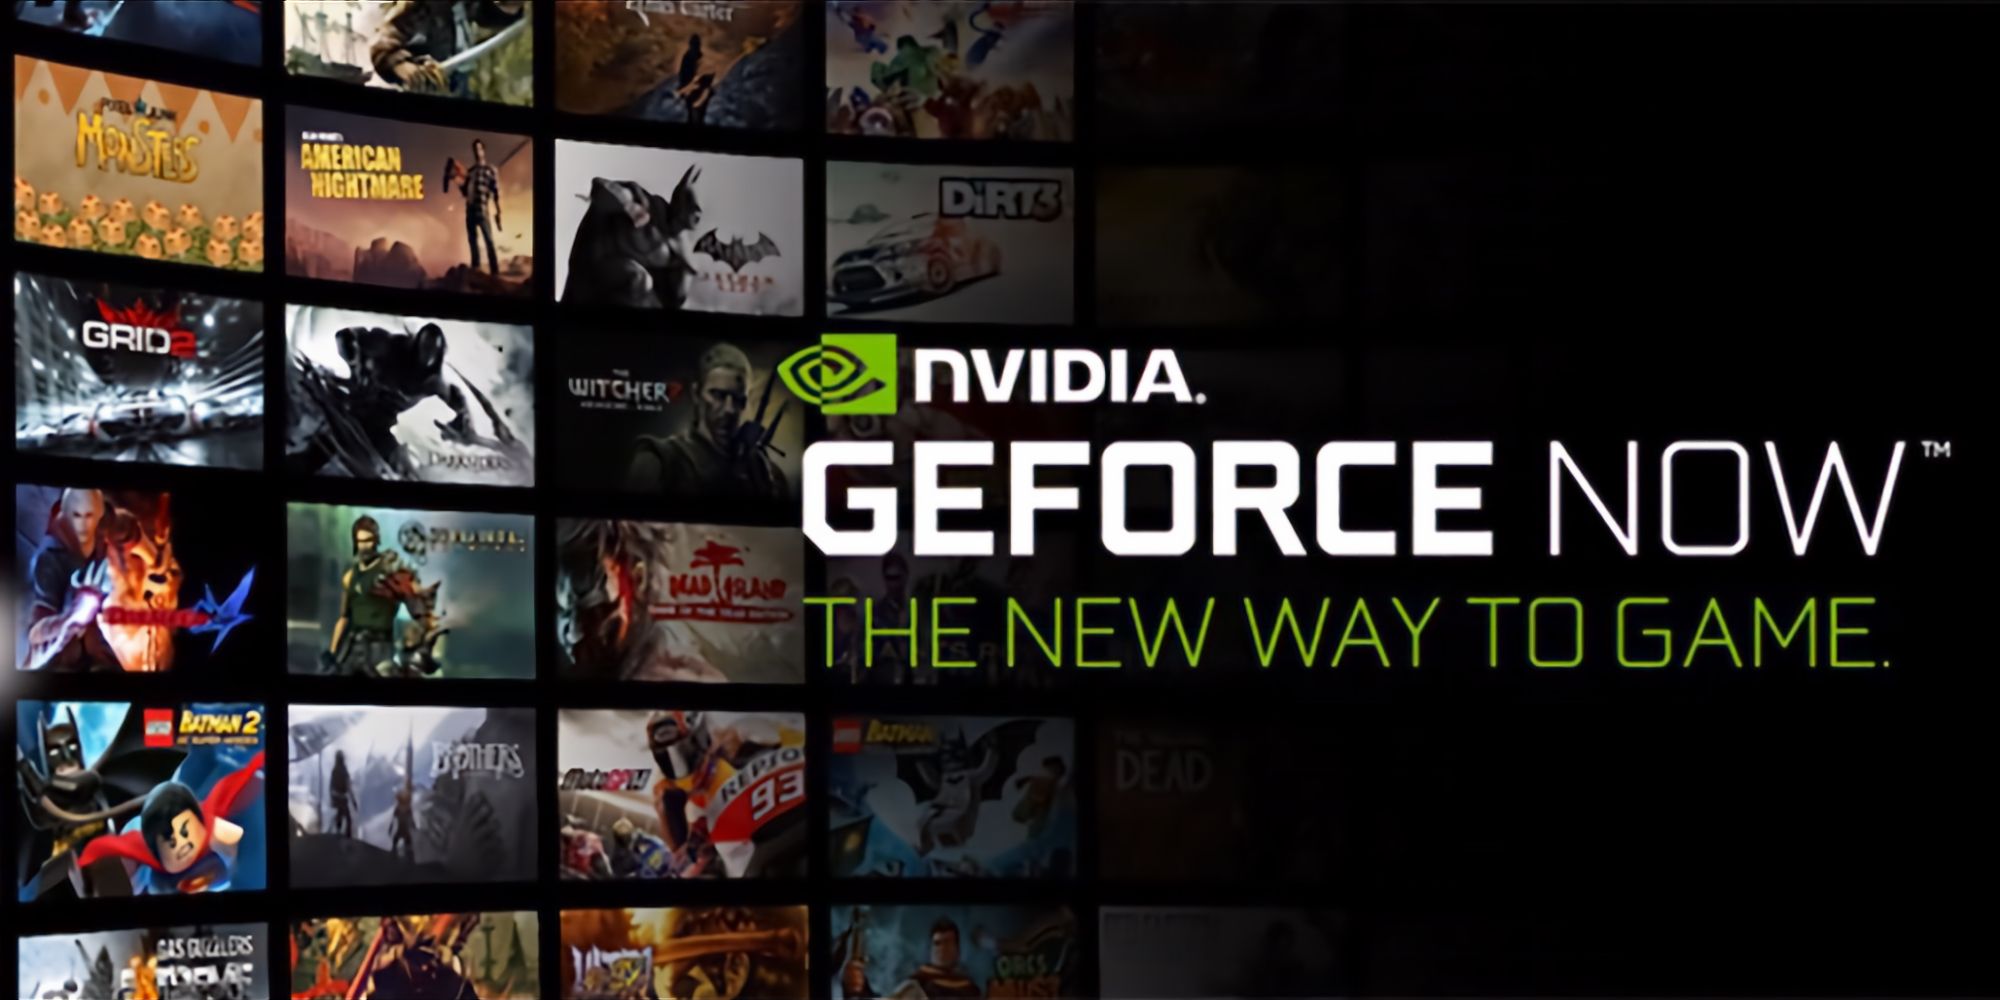 nvidia geforce now promo image official